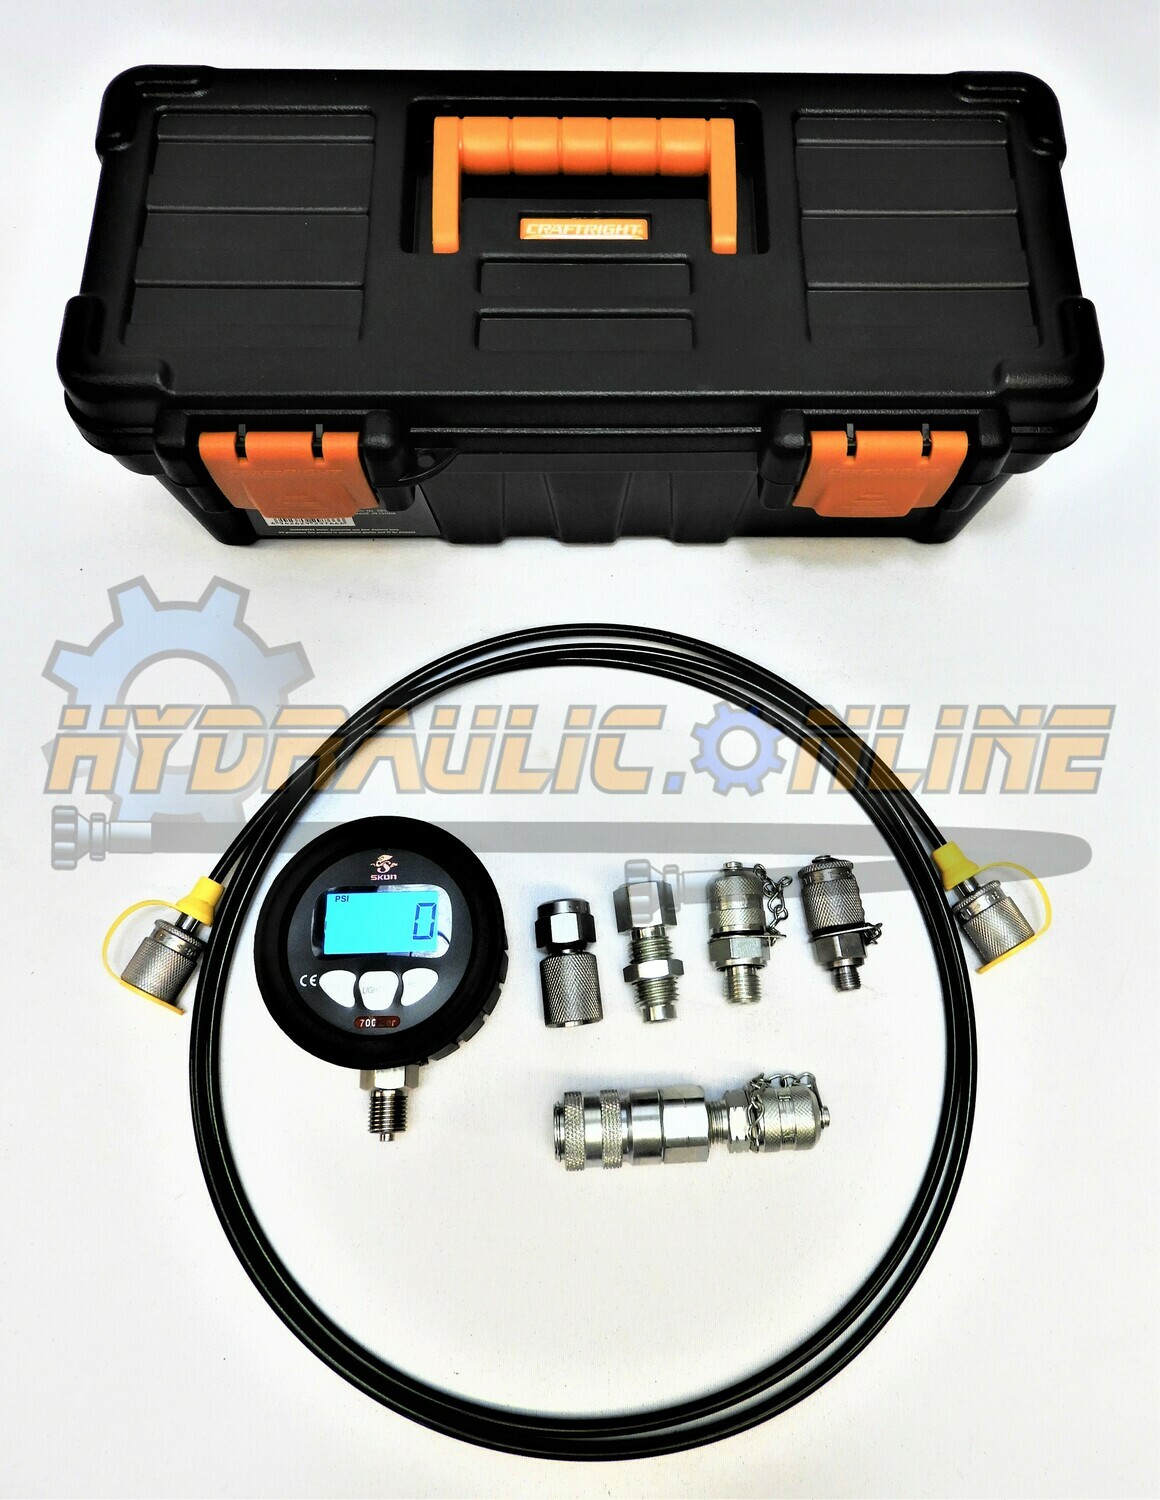 Digital Hydraulic Pressure Test Kit 0-700BAR/10,000PSI with Adapters